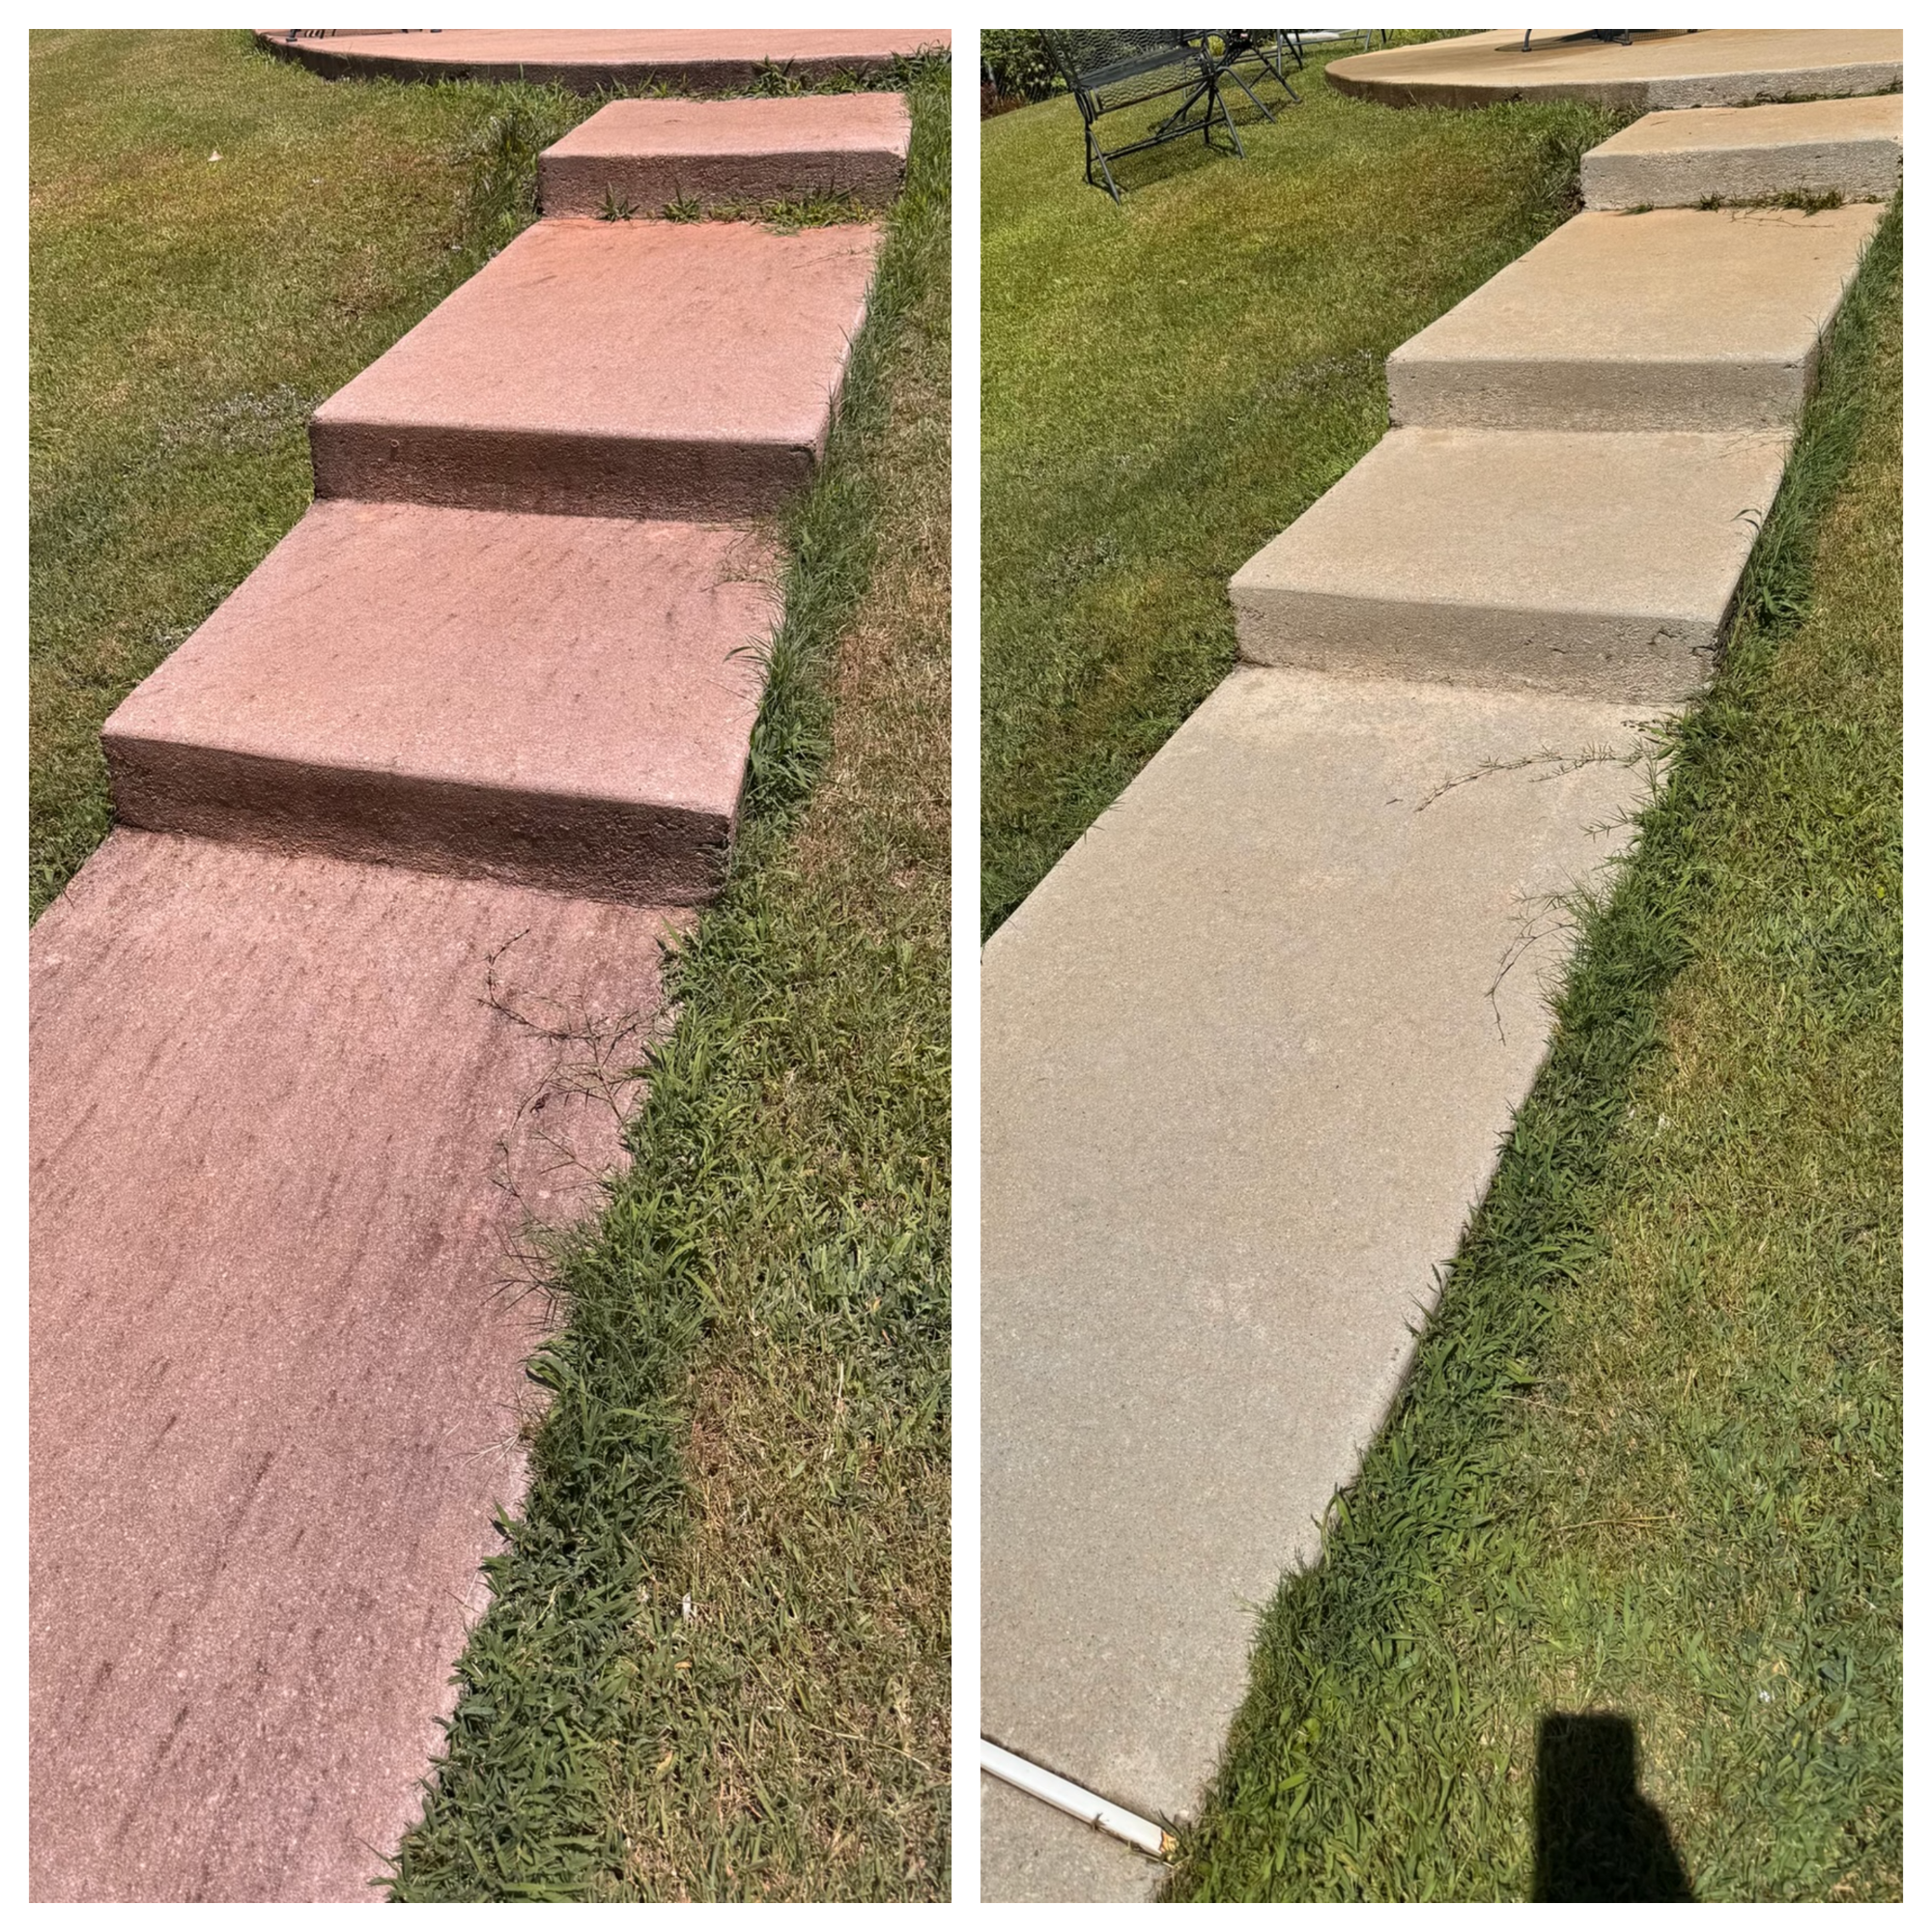 Quality, Consistency, and Efficiency is What you Get with This Sidewalk Cleaning in McDonough, GA